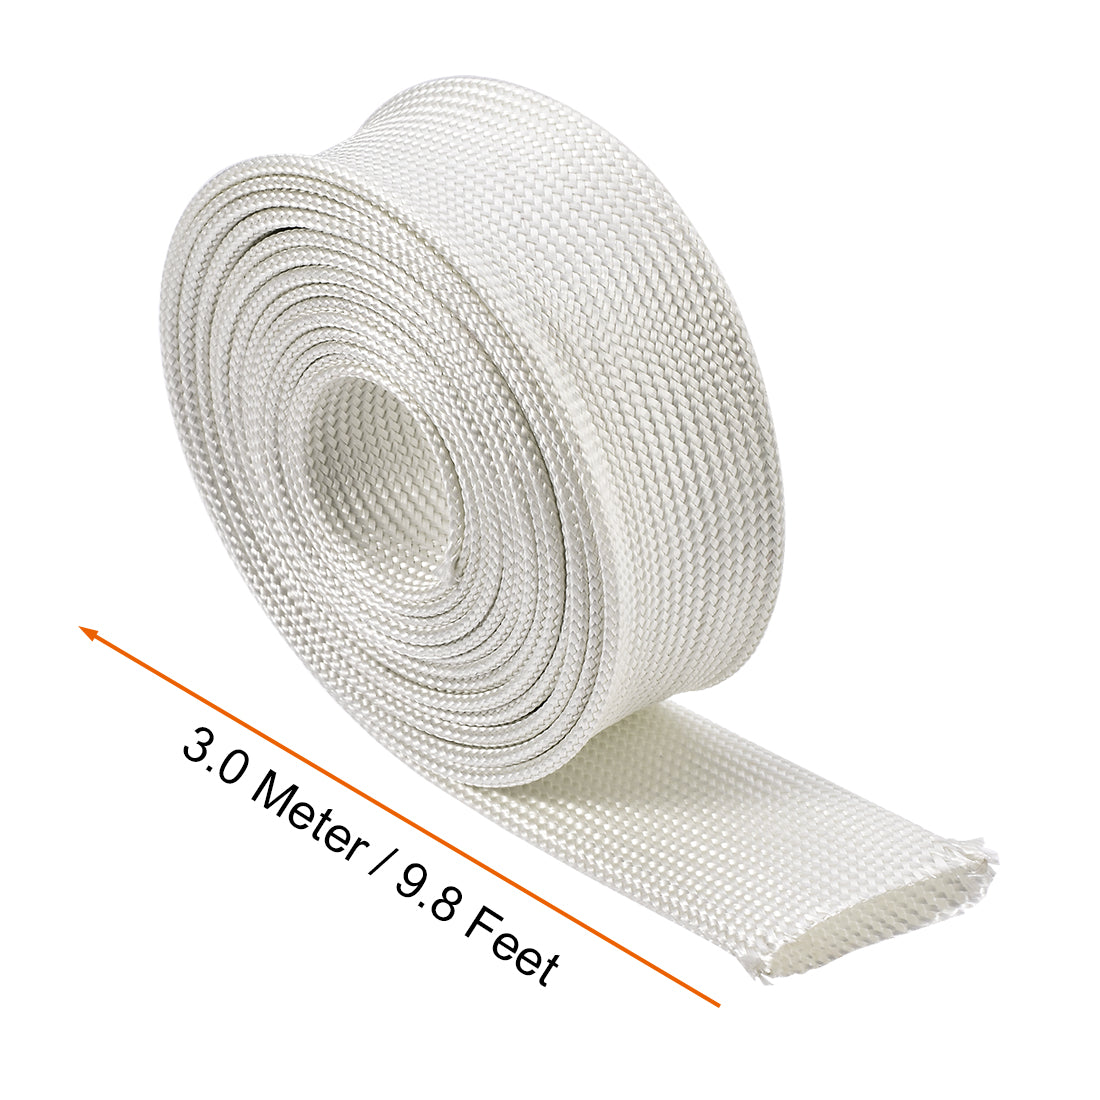 uxcell Uxcell Insulation Cable Protector, 9.8Ft-25mm High TEMP Fiberglass Sleeve White